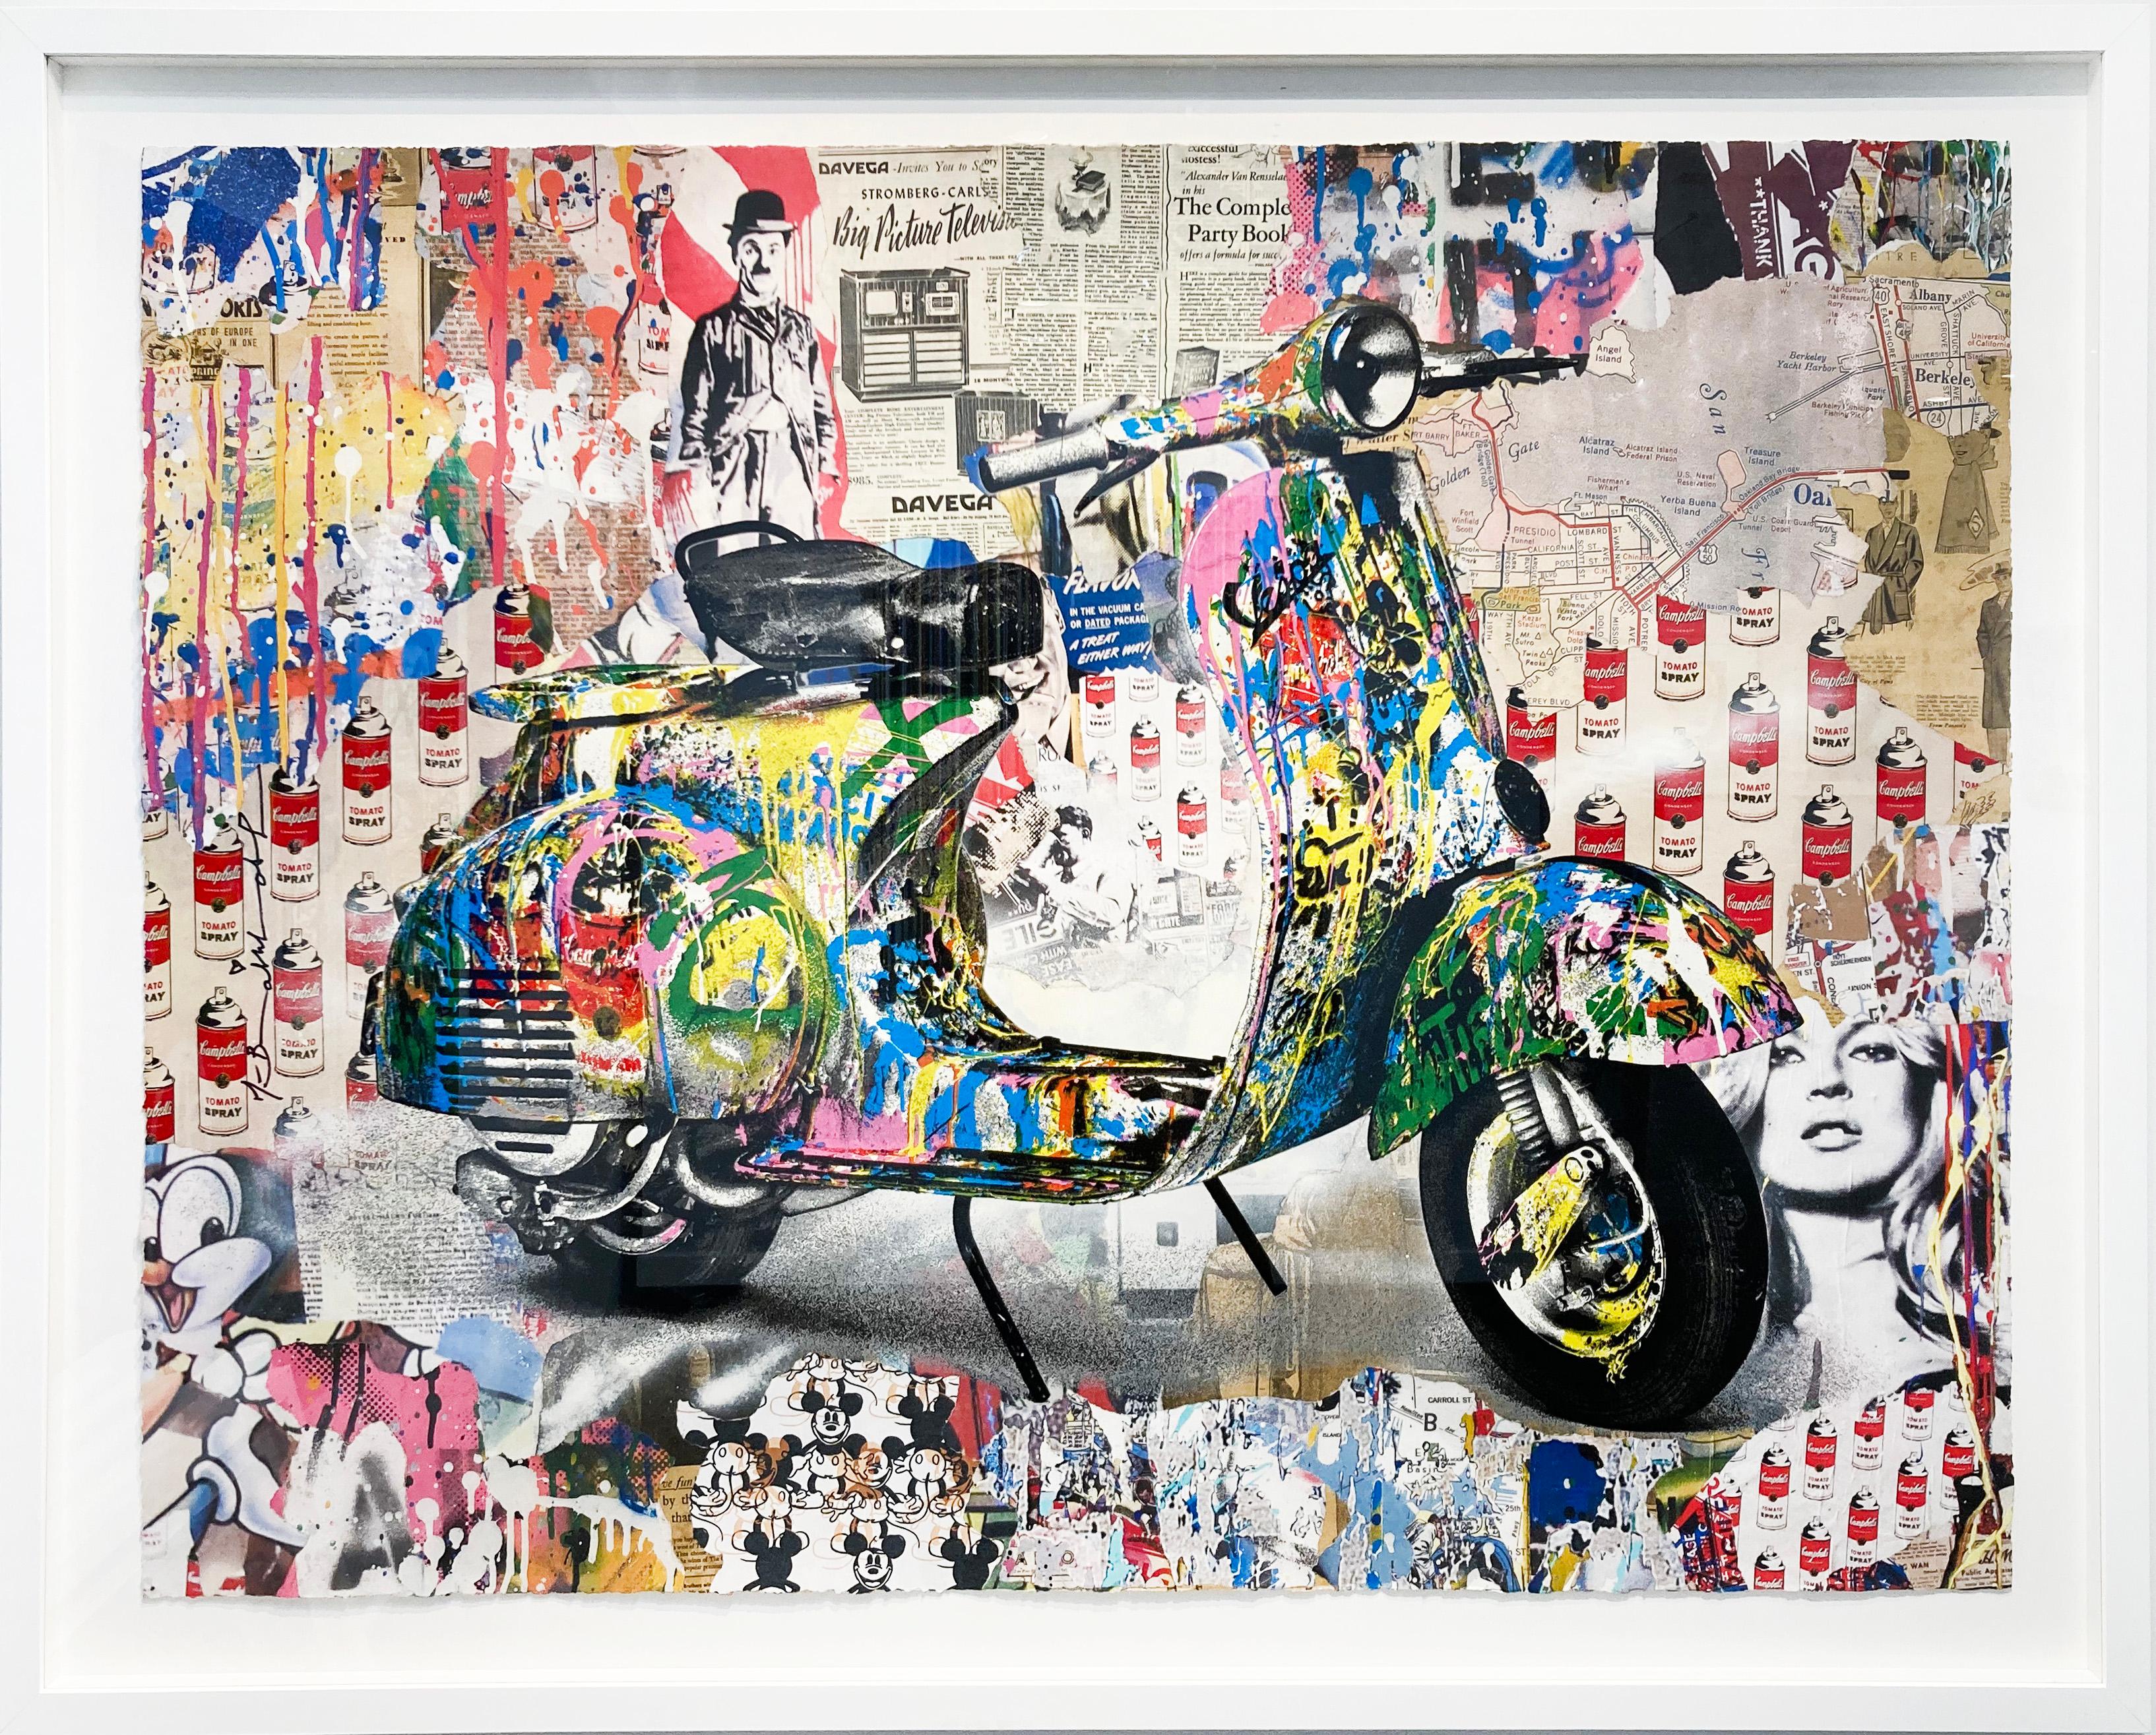 Scooter - Mixed Media Art by Mr. Brainwash